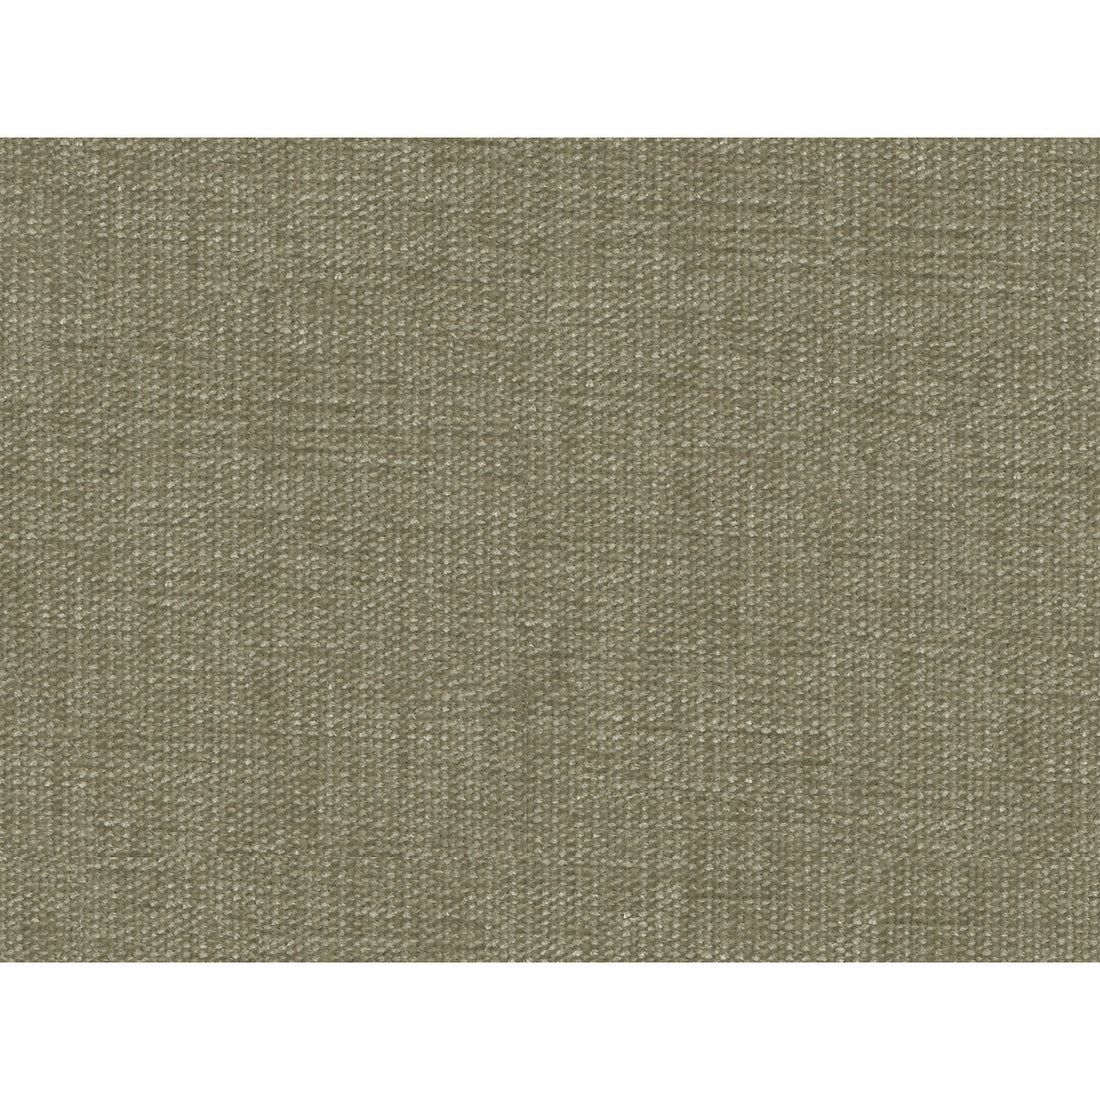 Kravet Contract fabric in 34961-161 color - pattern 34961.161.0 - by Kravet Contract in the Performance Kravetarmor collection